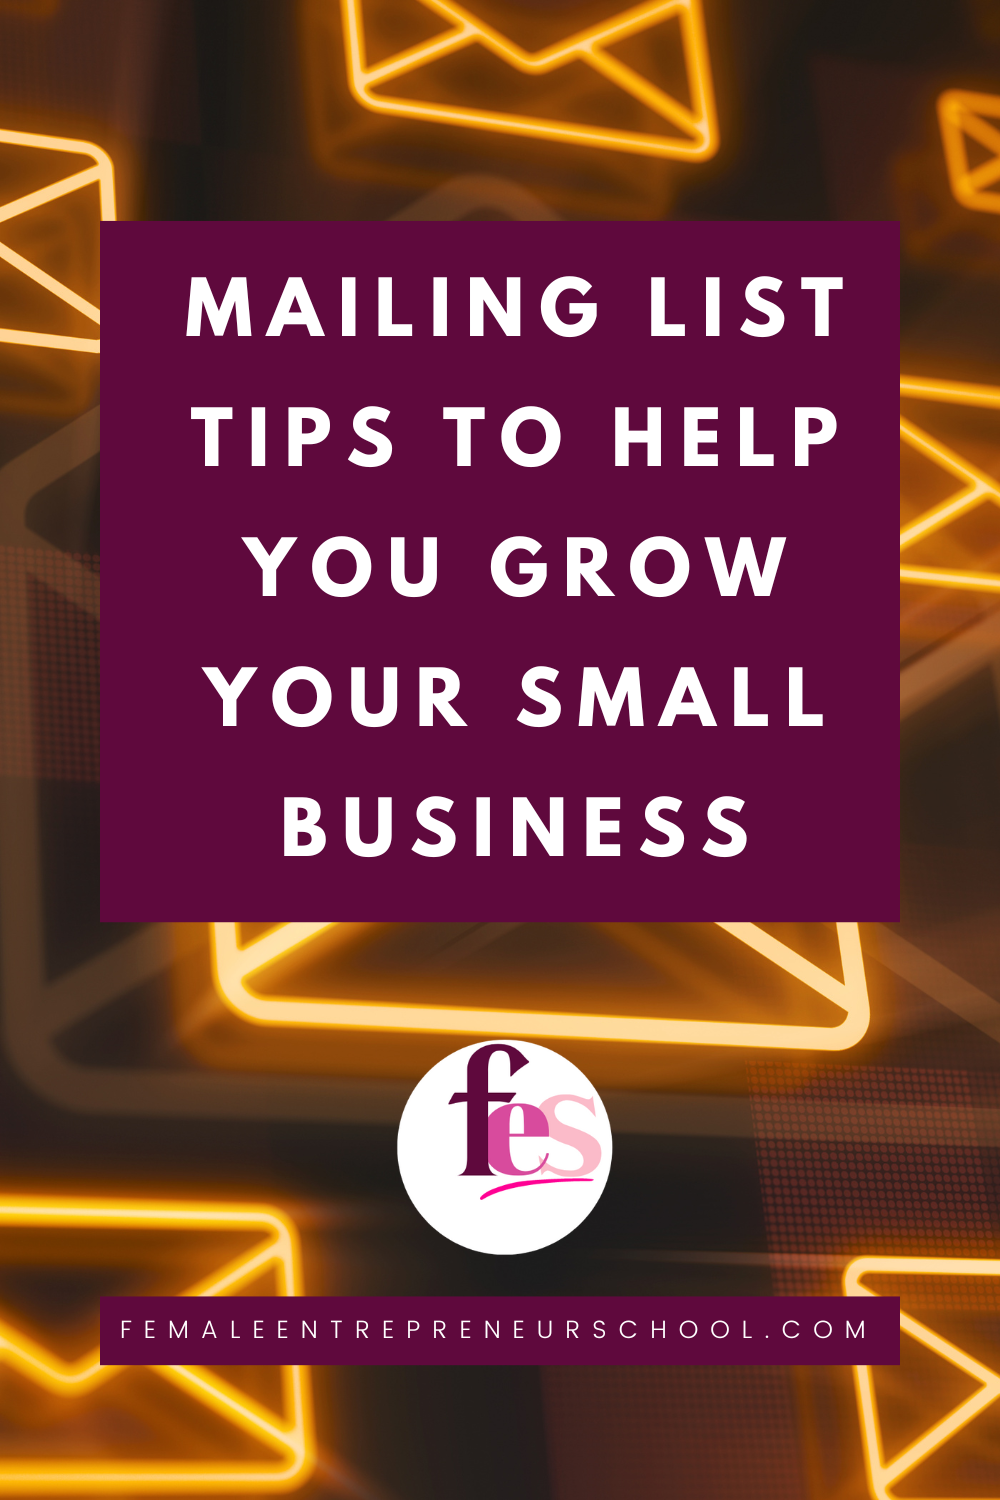 Mailing list tips to help you grow your small business with orange glowing images of letters behind.